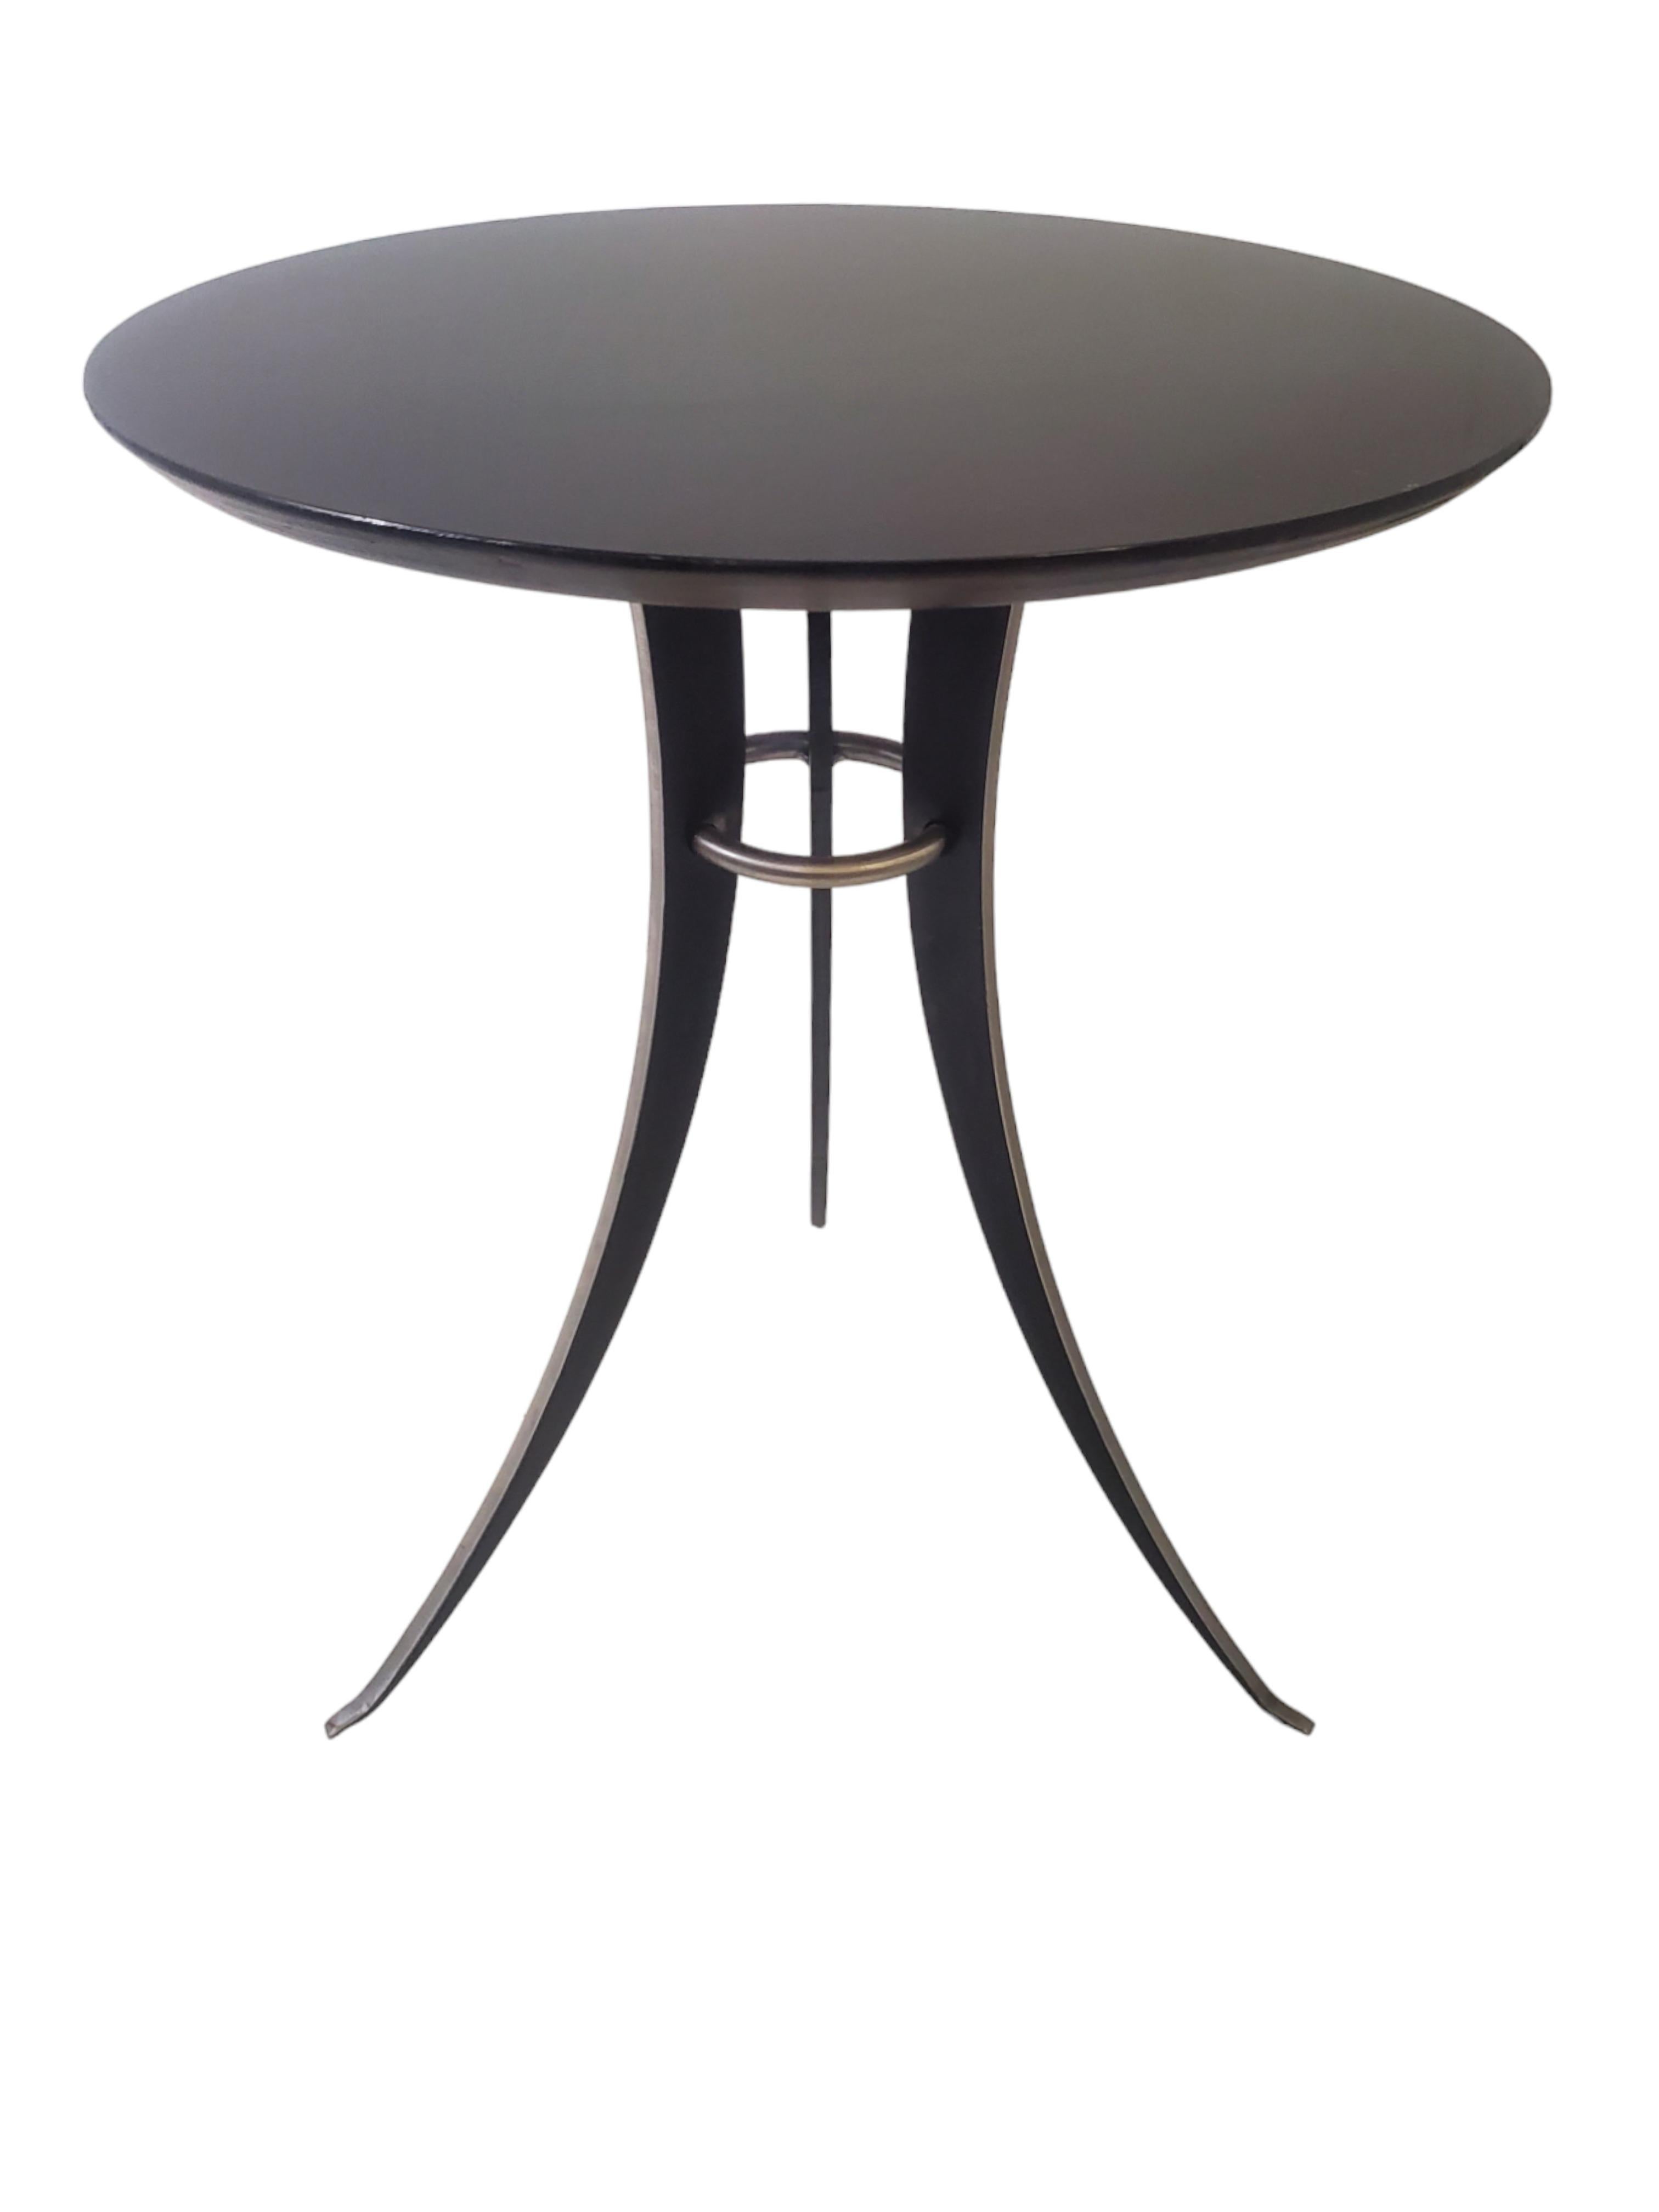 ( A pair is available ) 
A Minimalist  Mid Century Modern tulip design, splay leg end table in steel and lacquered wood in the style of Osvaldo Borsani.
The austere and streamline design make this table appealing in any decor. 
The delicate tapering